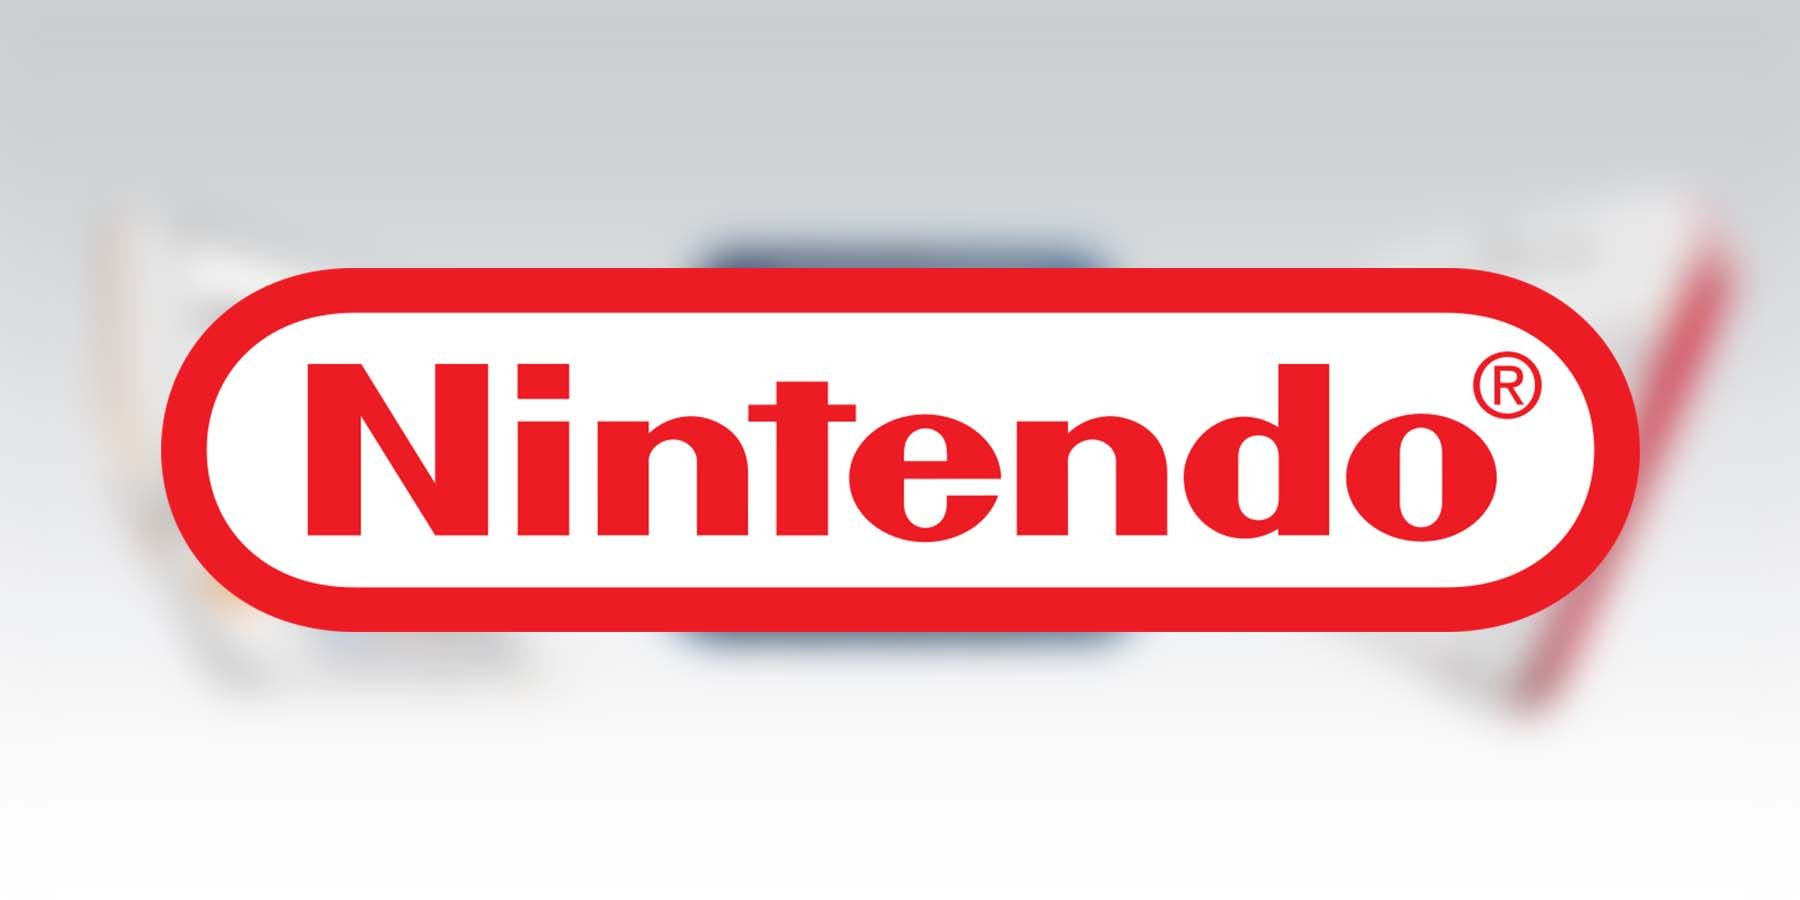 Nintendo logo over blurred background of 3DS family of consoles